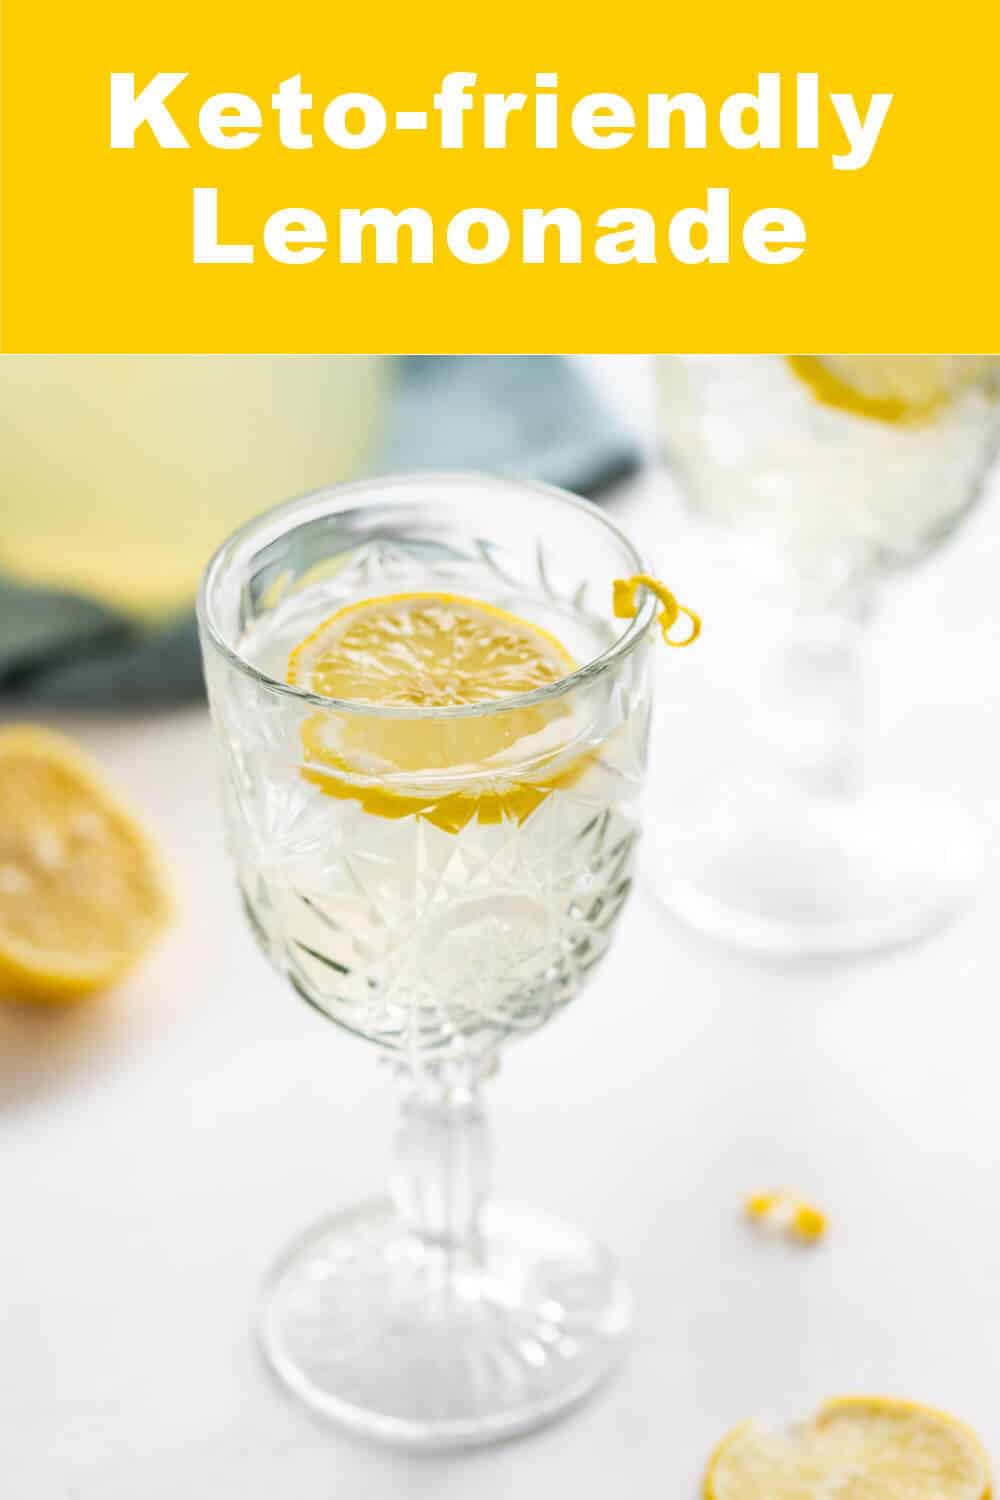 What if I told you that you could have a sweet summer drink that’s totally keto-friendly? My easy Keto Lemonade recipe is sweetened with sugar-free simple syrup and flavored with completely natural lemon juice for a simple, refreshing beverage that you don’t need to feel guilty about enjoying! via @artfrommytable